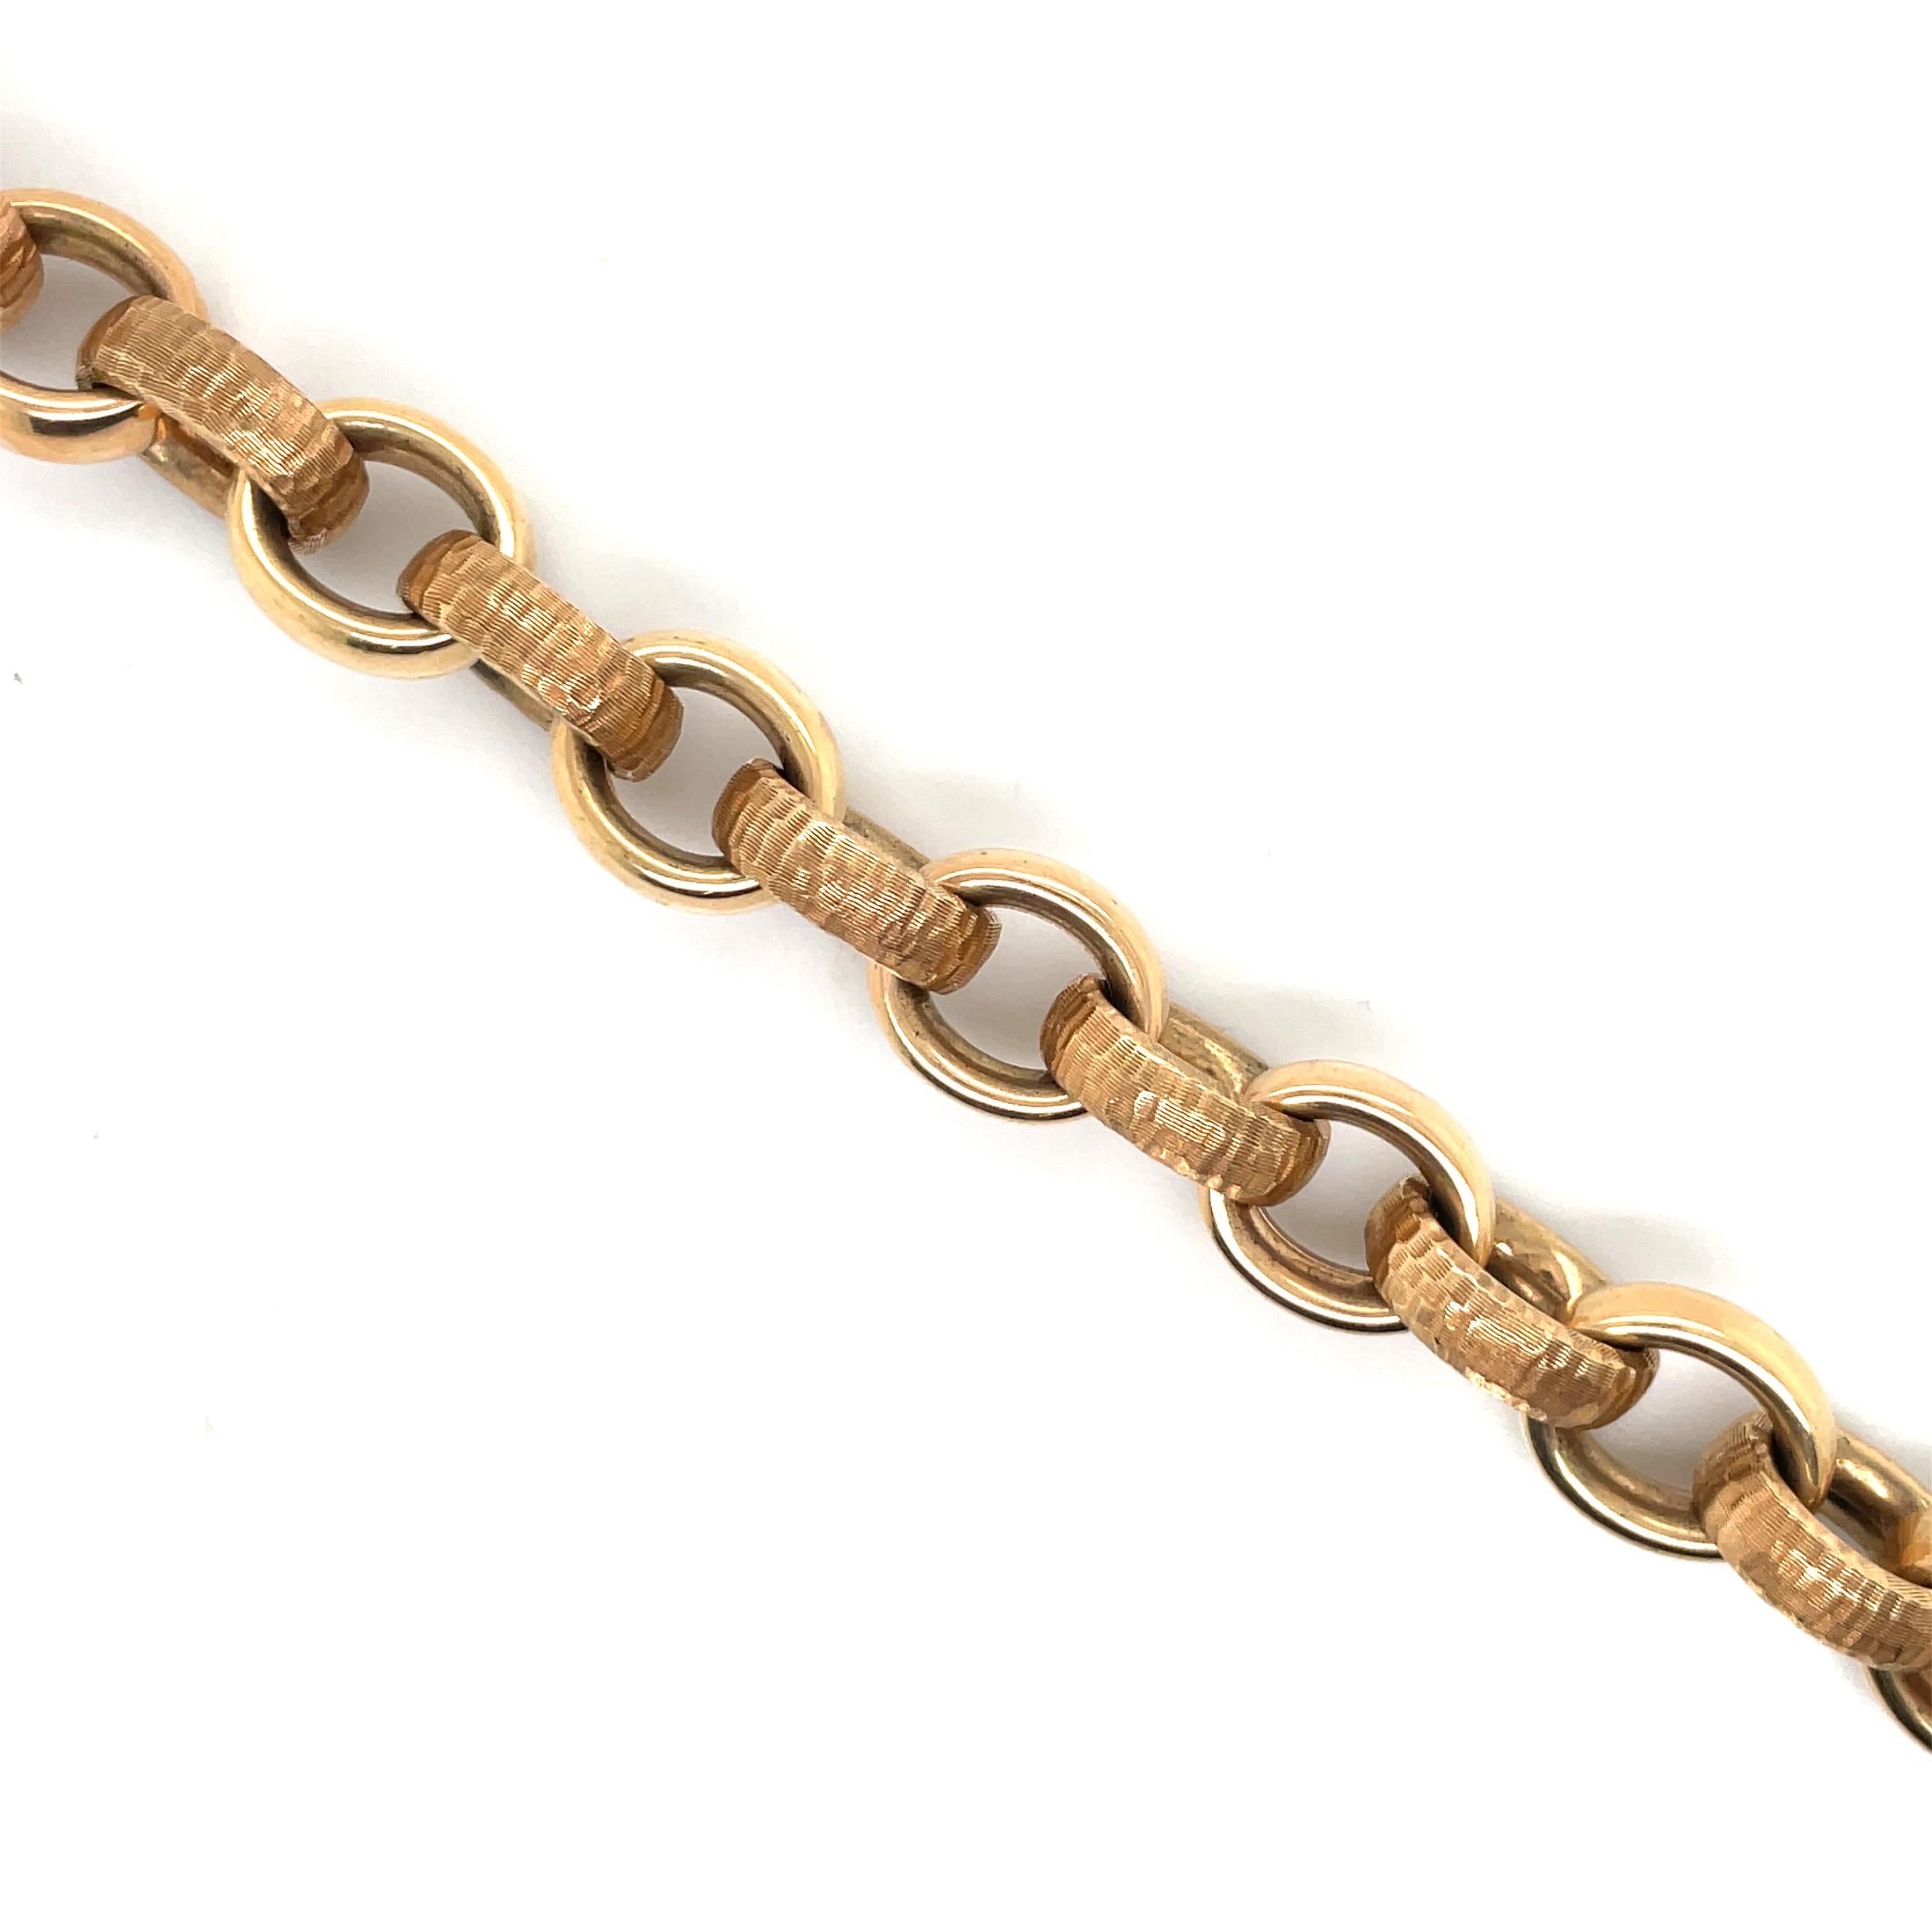 Made in Italy, this 14 Karat Rose Gold bracelet features alternating high polished & hammered motif links weighing 36.6 Grams.
